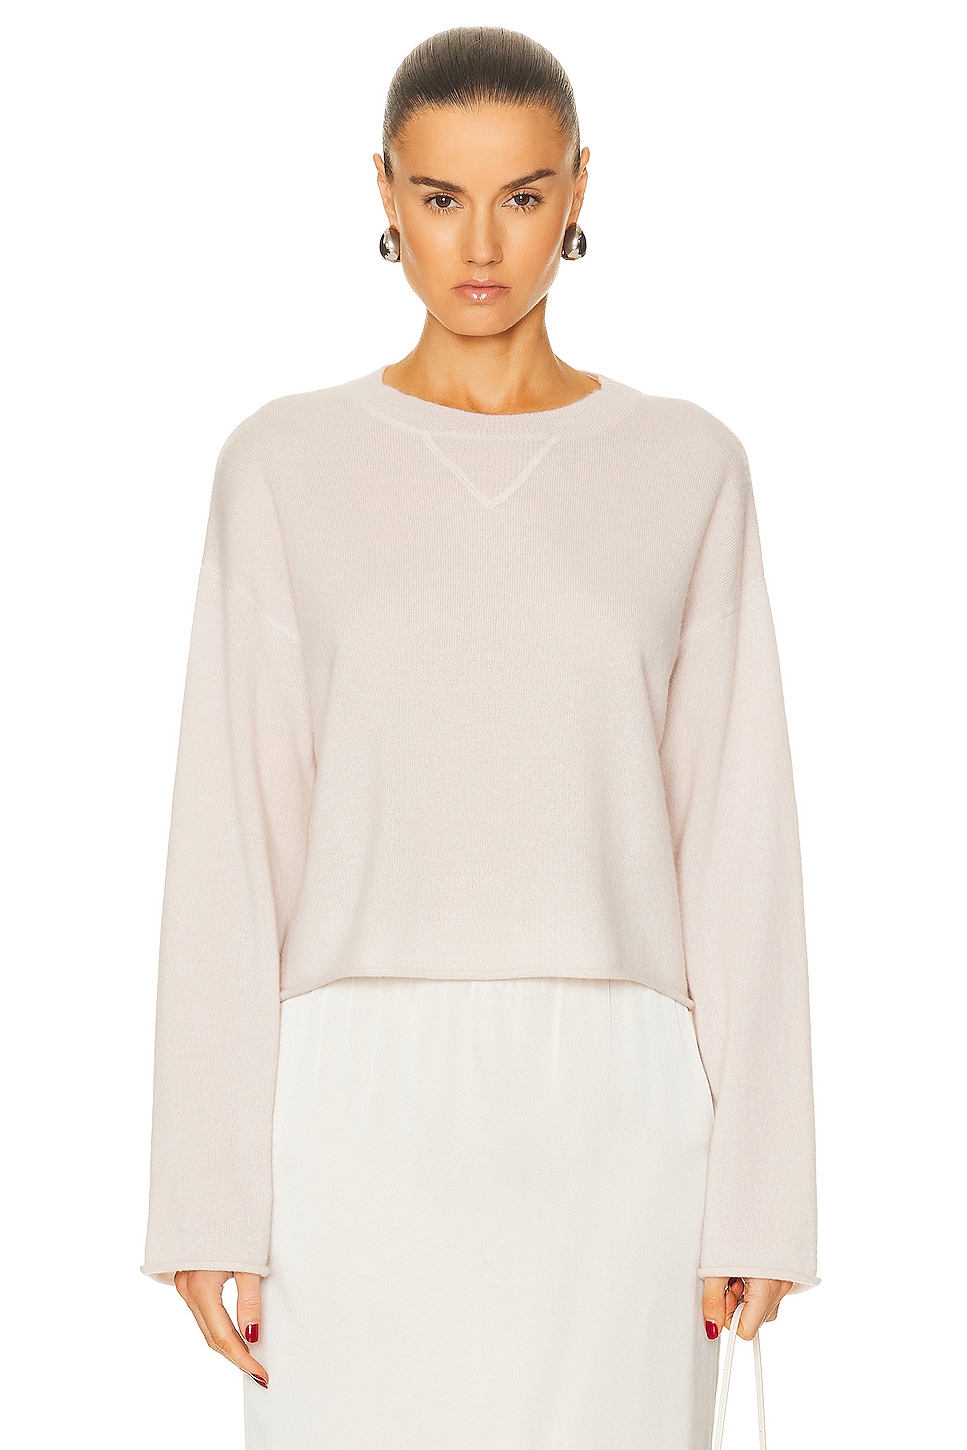 Image 1 of SABLYN Maureen Cashmere Sweater in Lunar